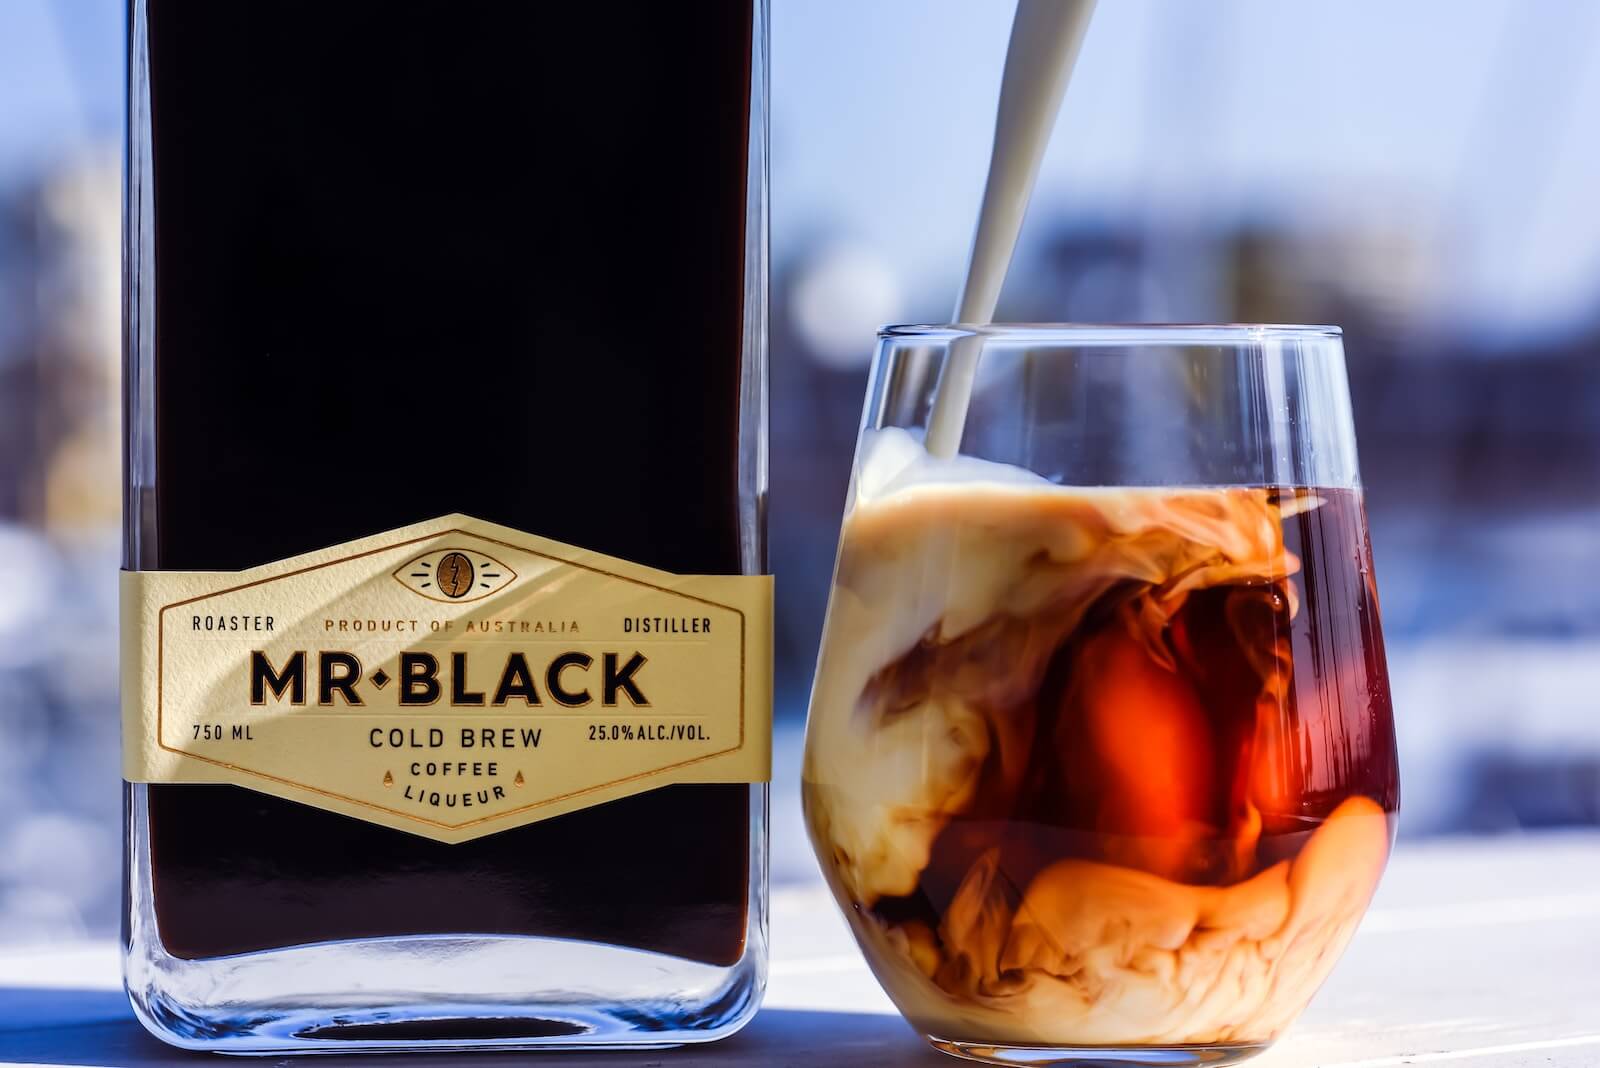 Mr Black Coffee Liqueur photo by YesMore Content on Unsplash